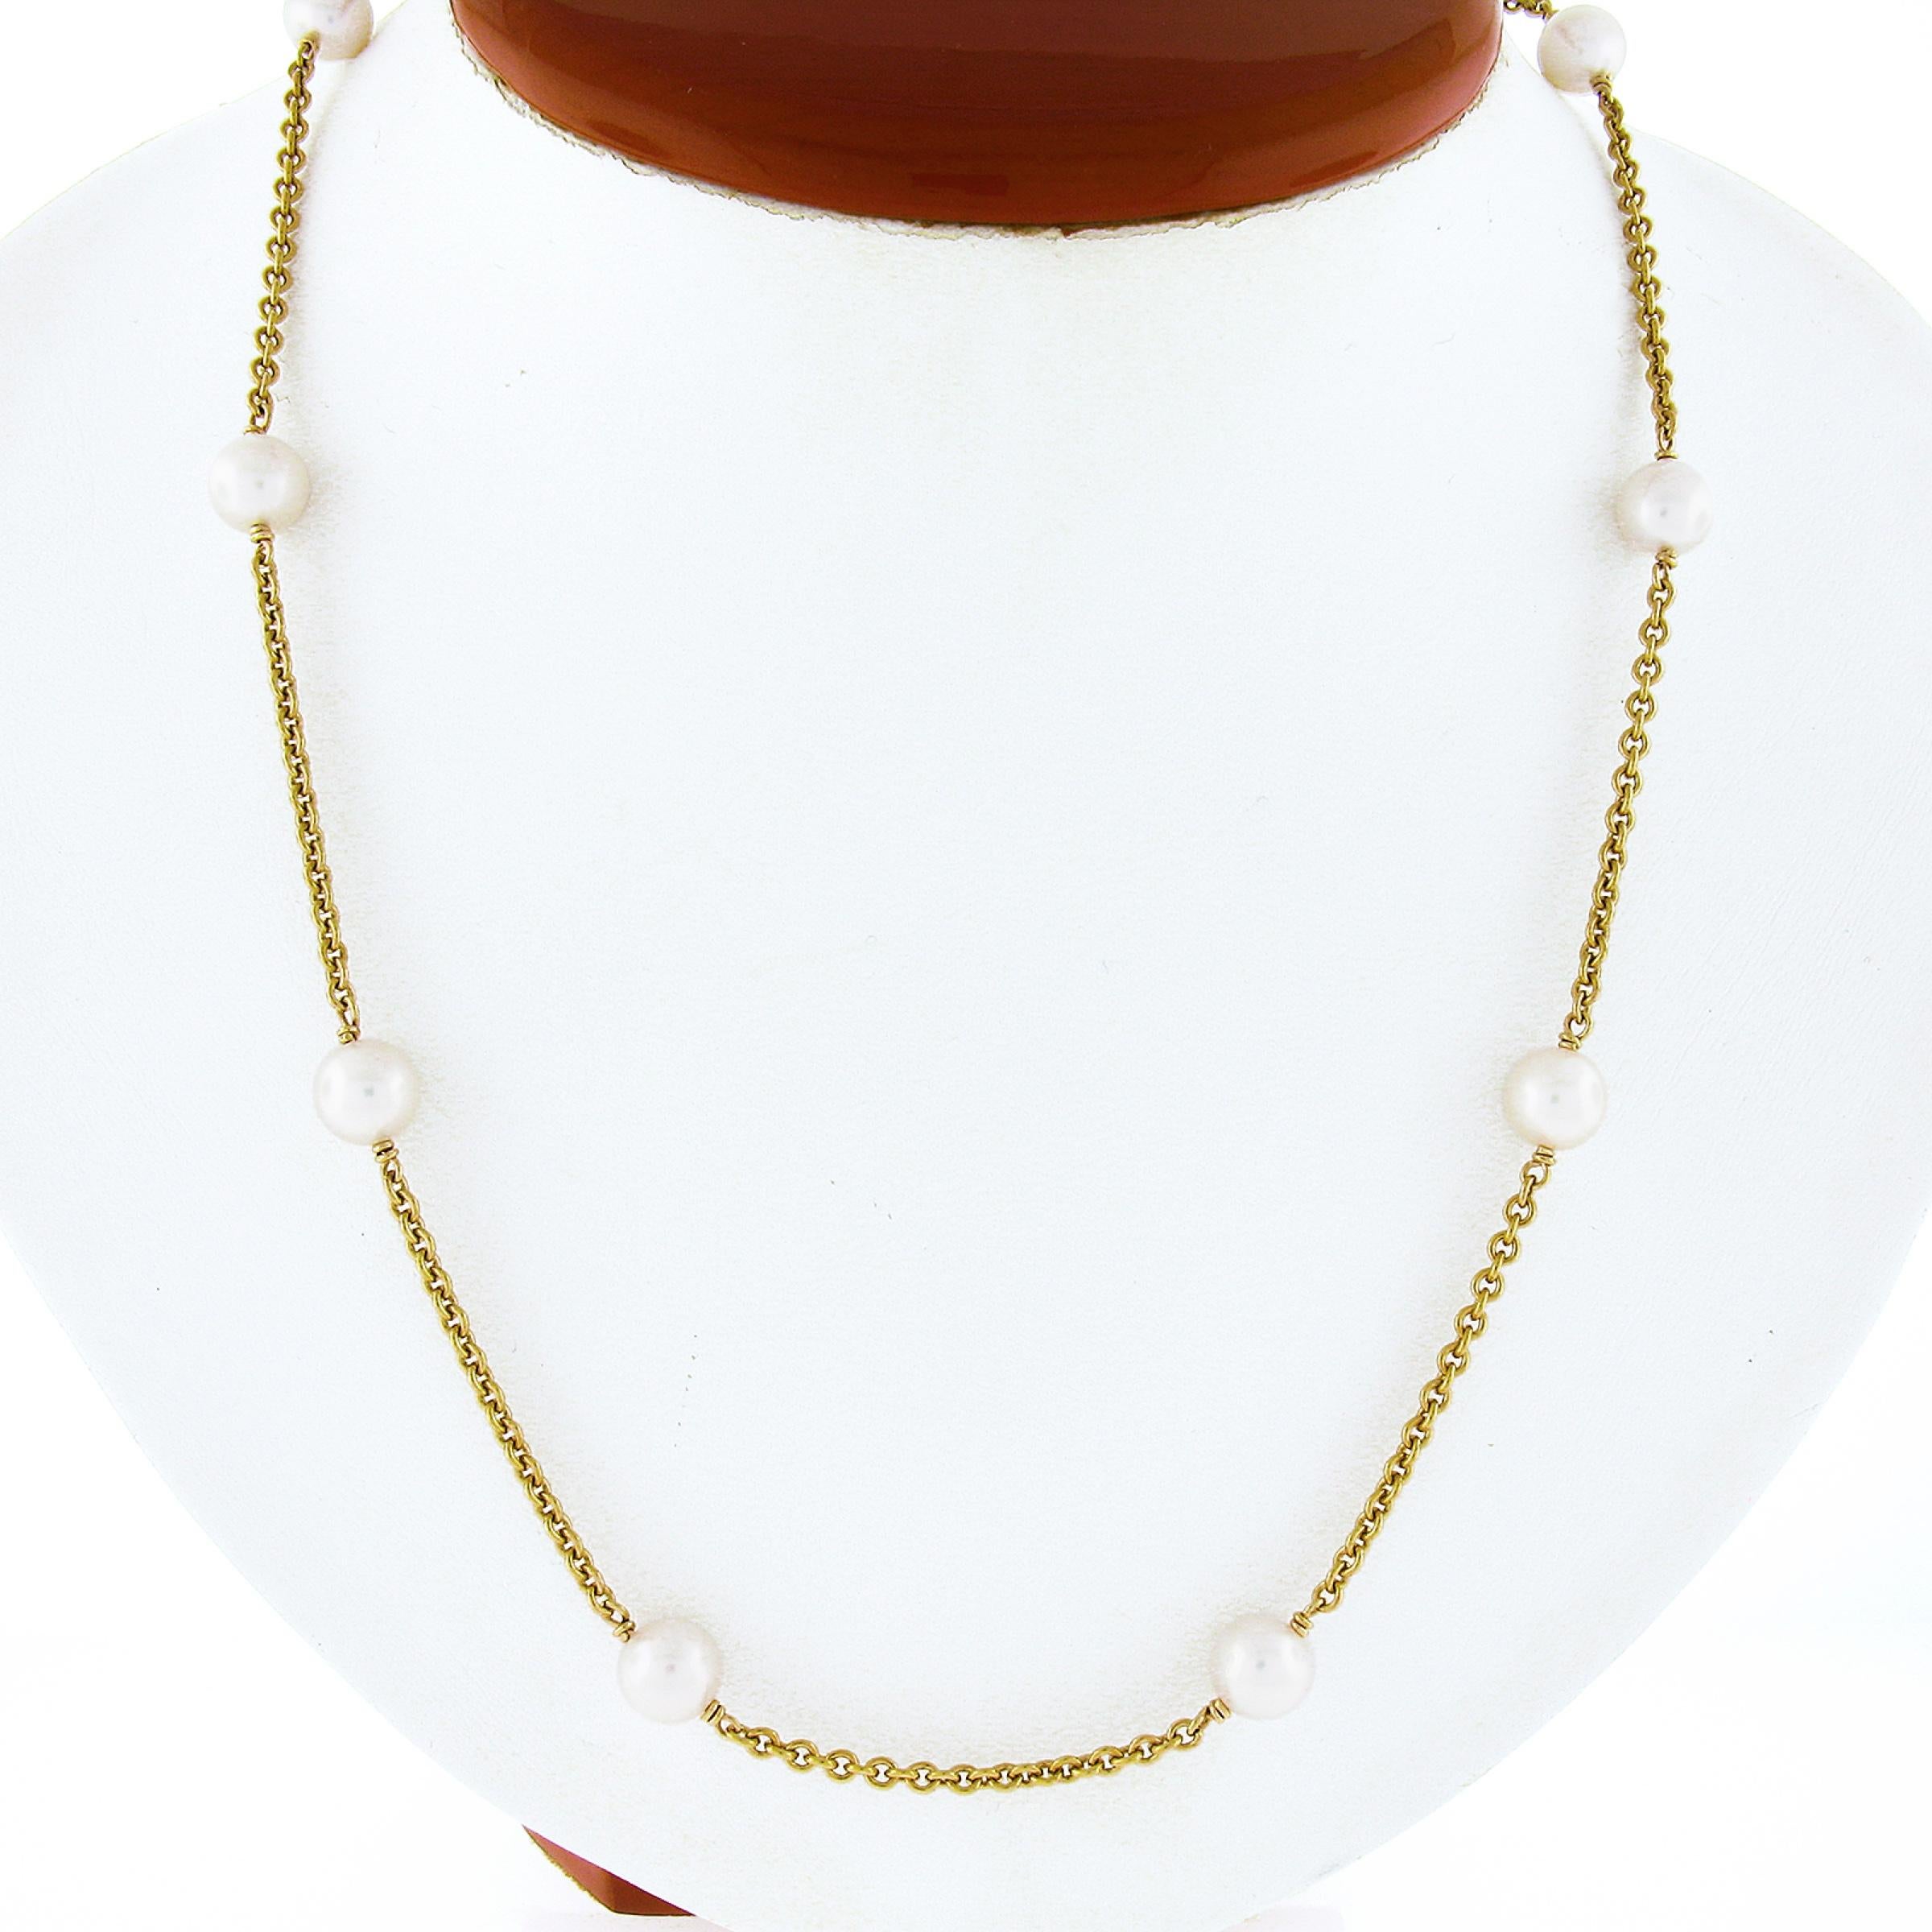 Here we have a gorgeous pearl by the yard style necklace crafted in solid 14k yellow gold and features 12 round cultured pearls neatly and evenly spaced out throughout the solid 23 inches cable link chain. These wonderful pearls are well matched in